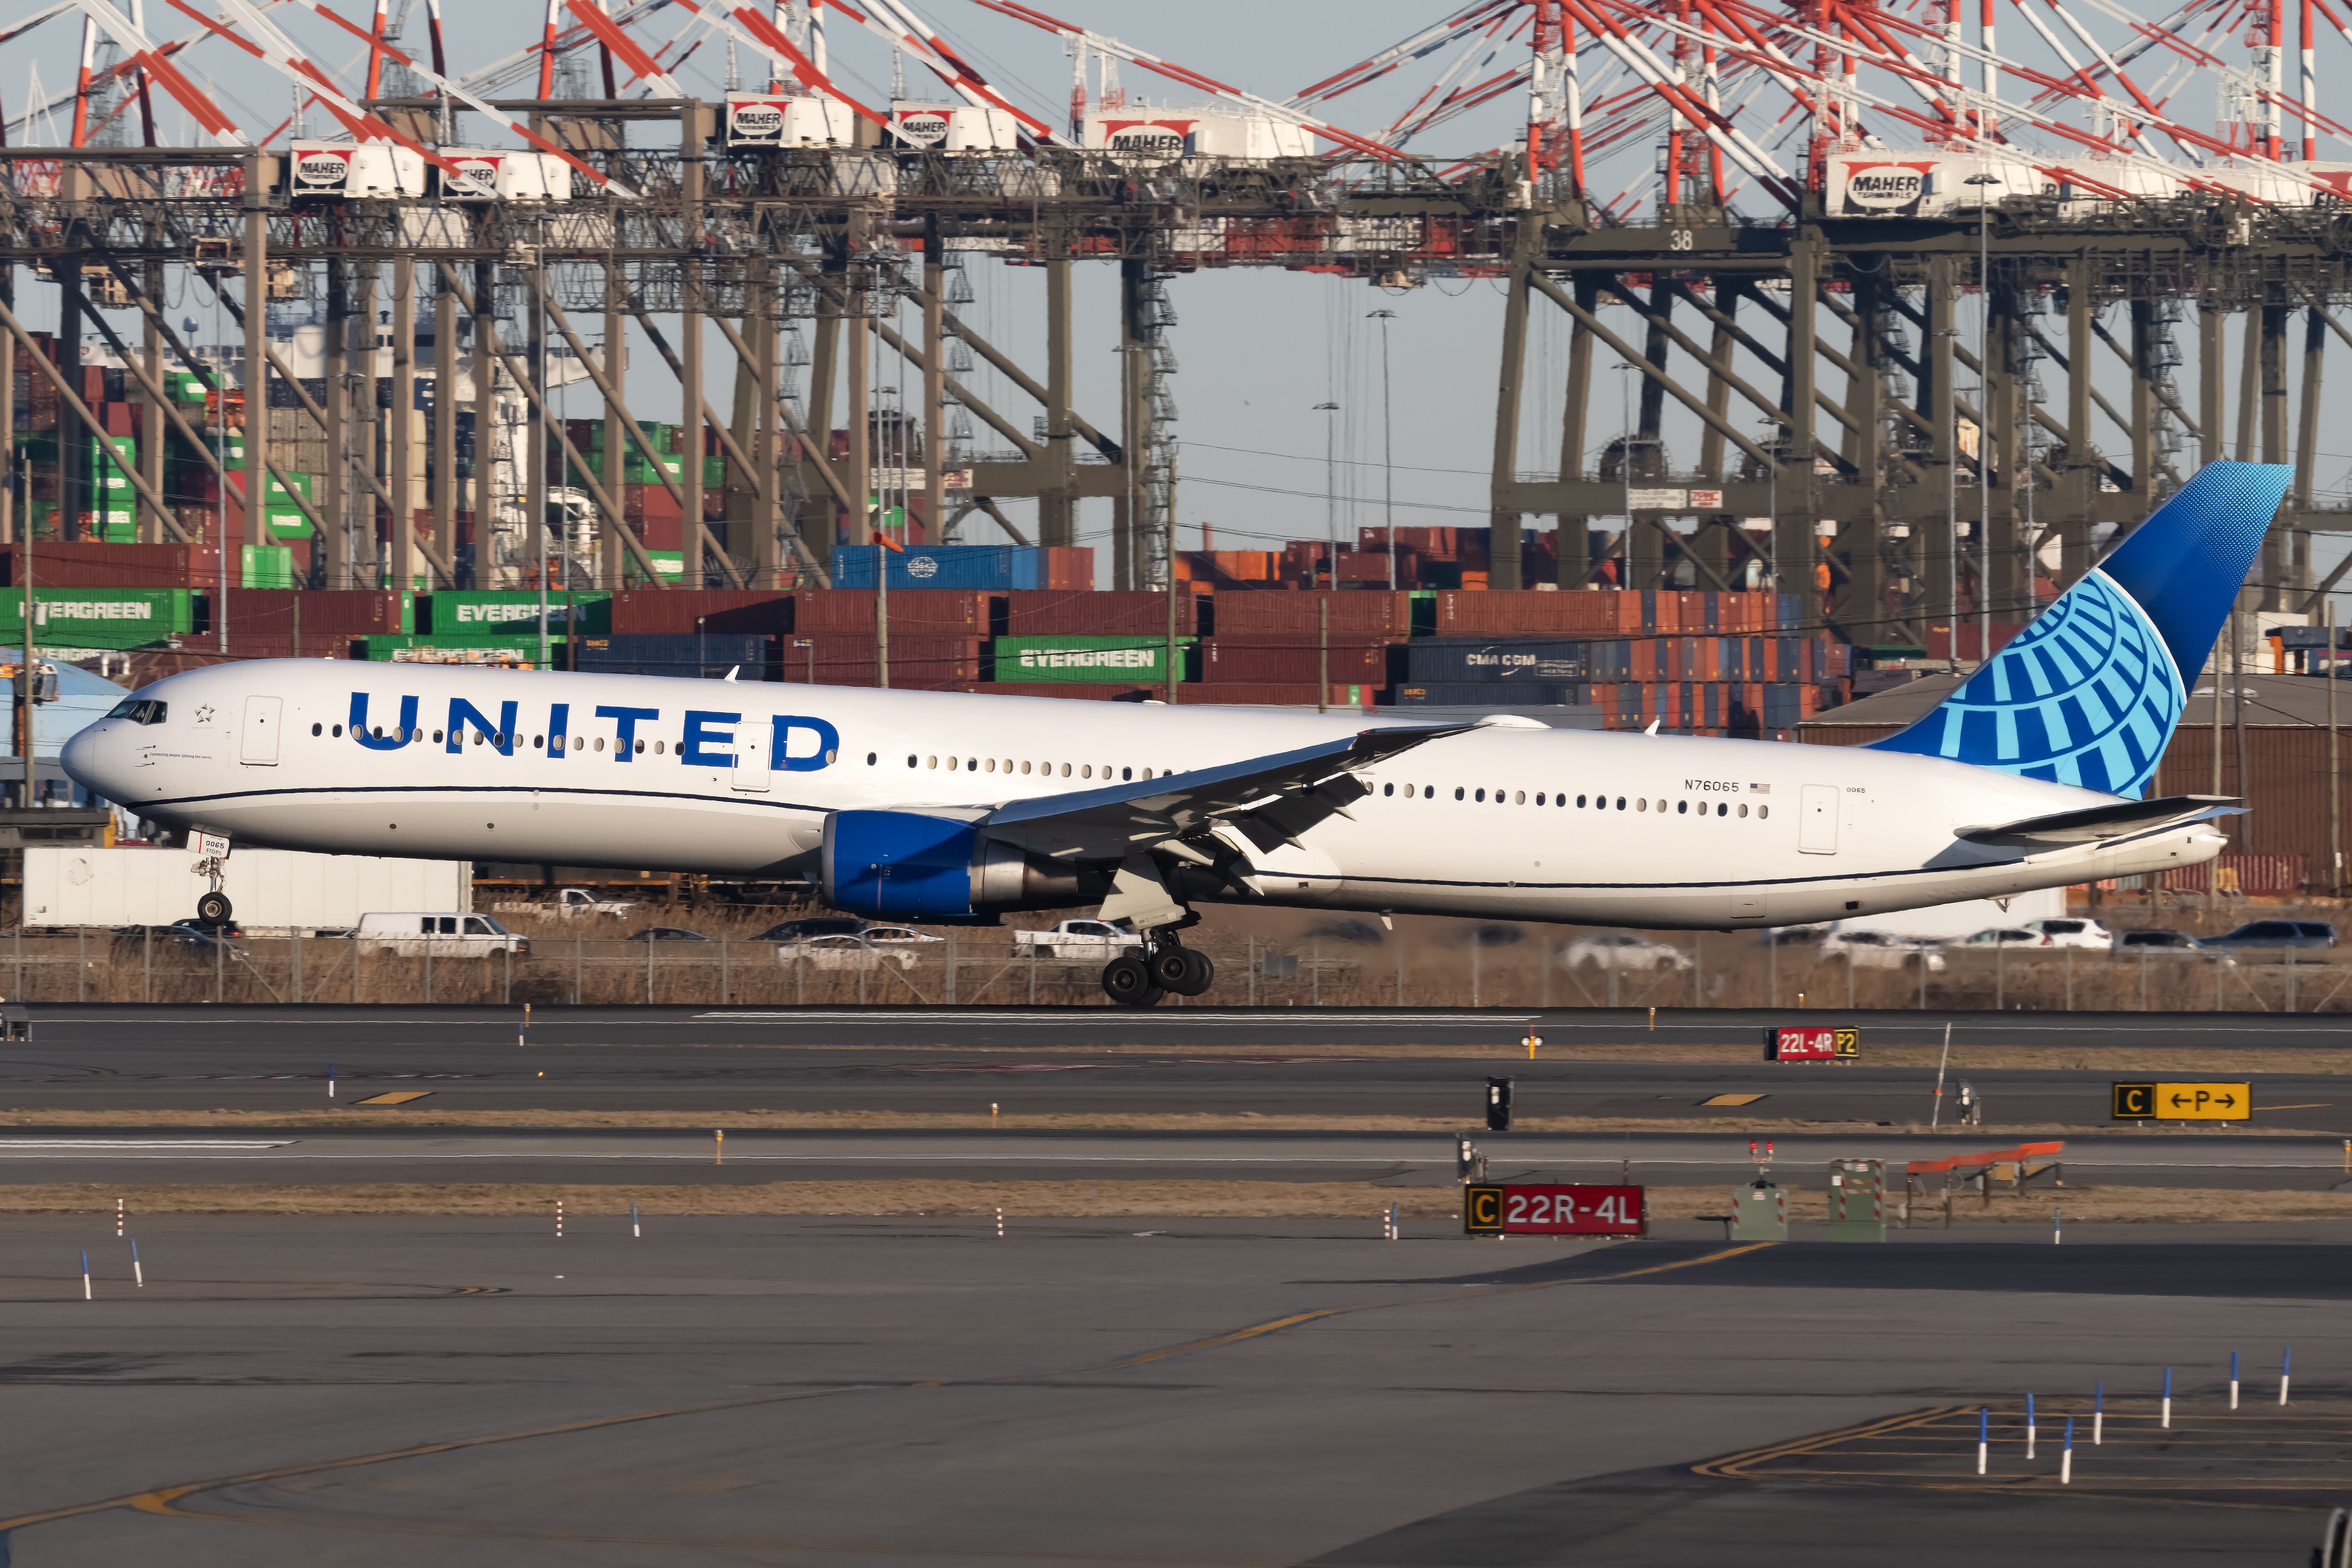 A United Airlines Boeing 767-400ER Landing on a runway at Newark Airport.